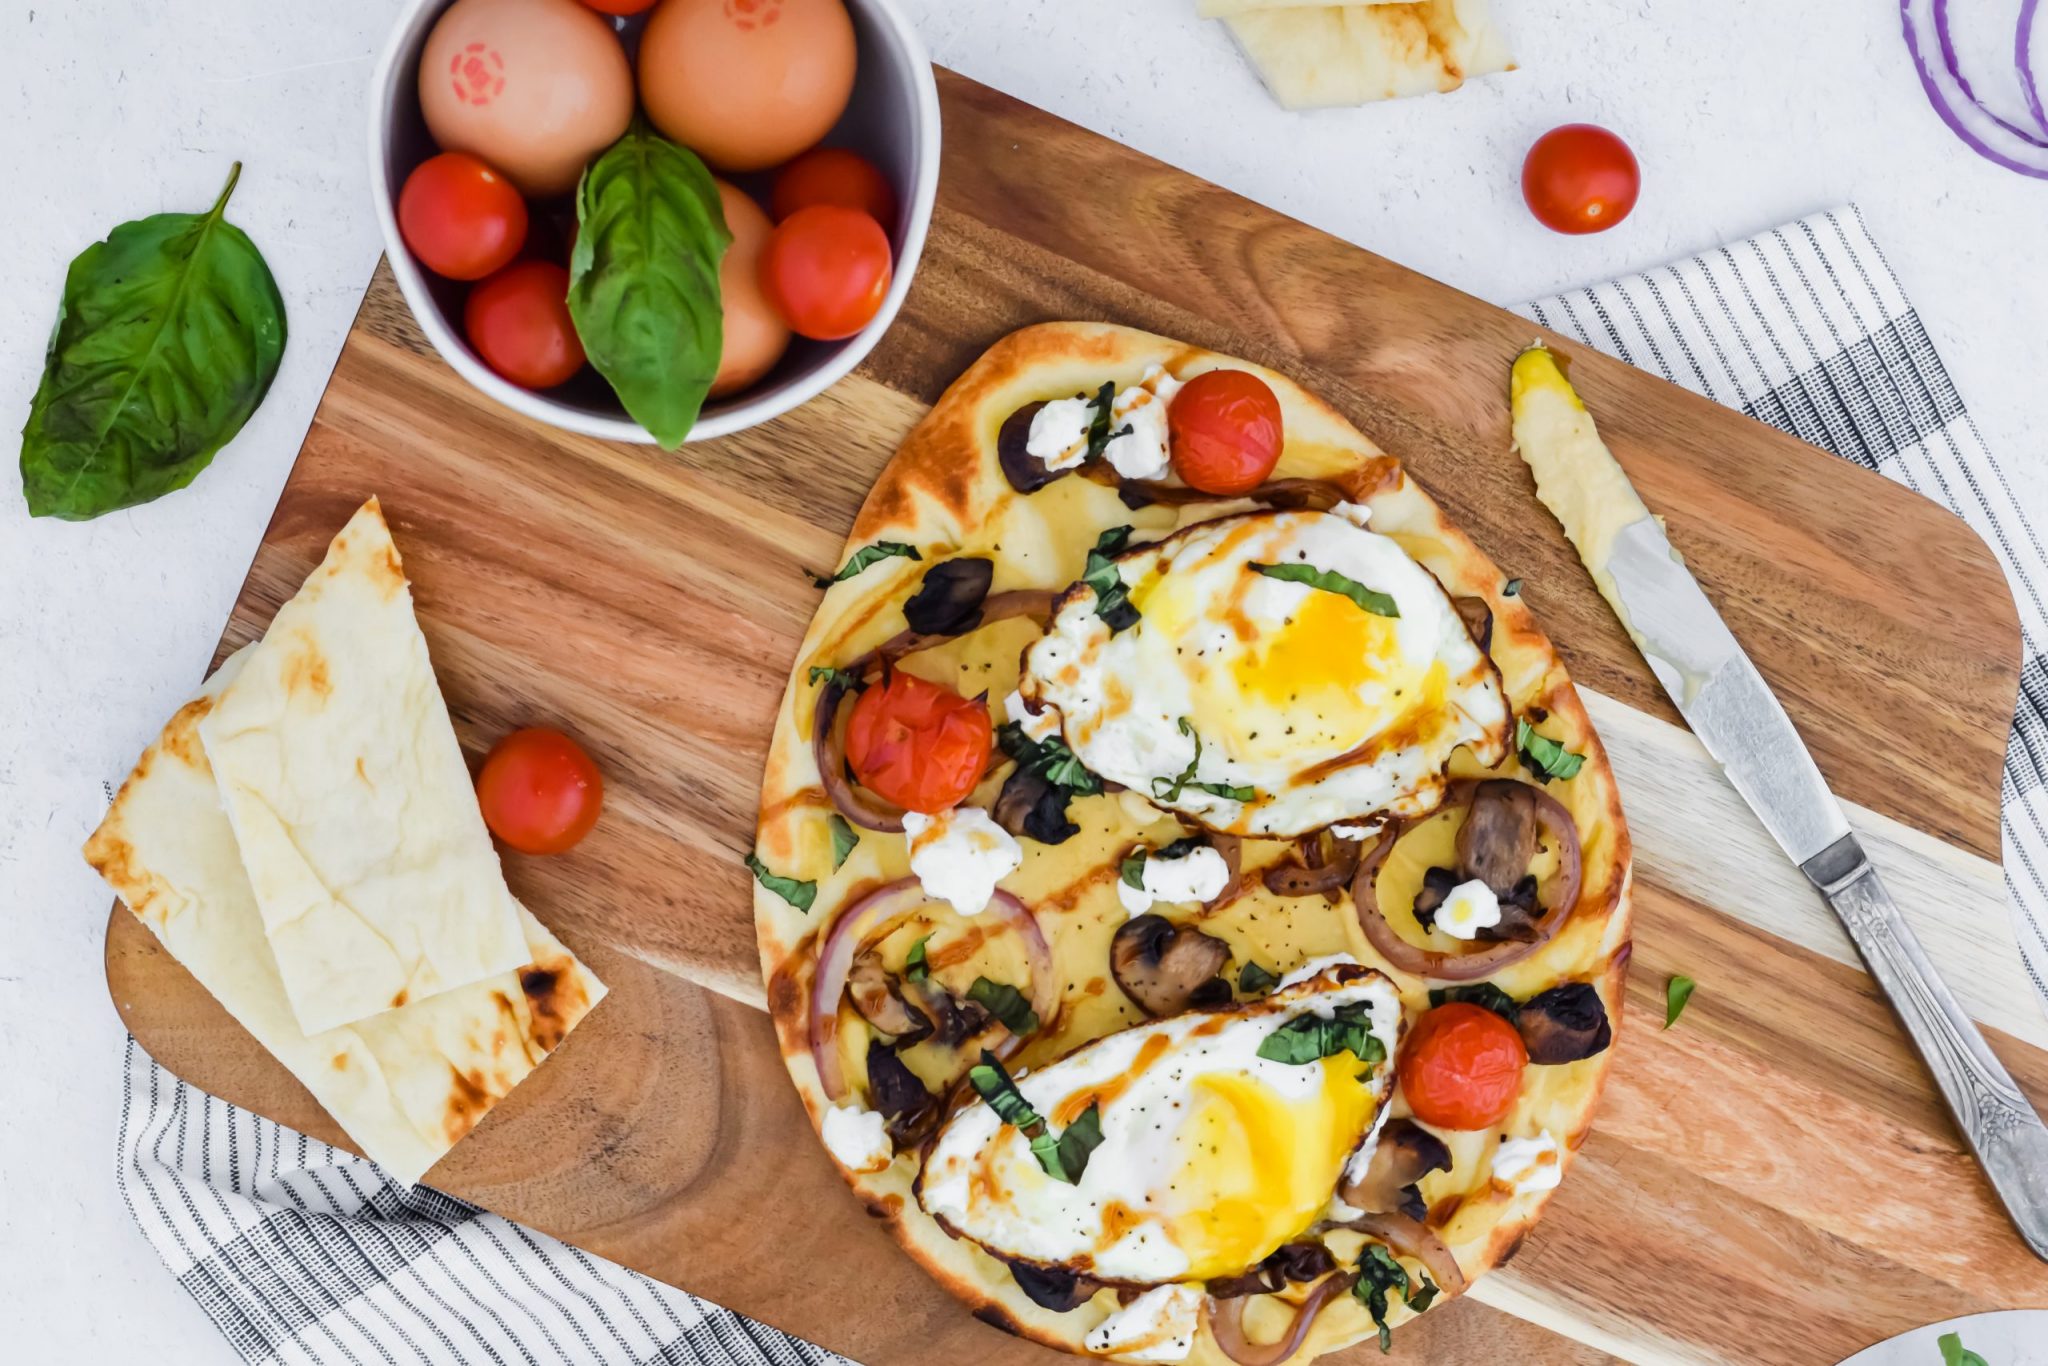 Savory Breakfast Flatbread with hummus, fried eggs, vegetables, goat cheese and balsamic glaze